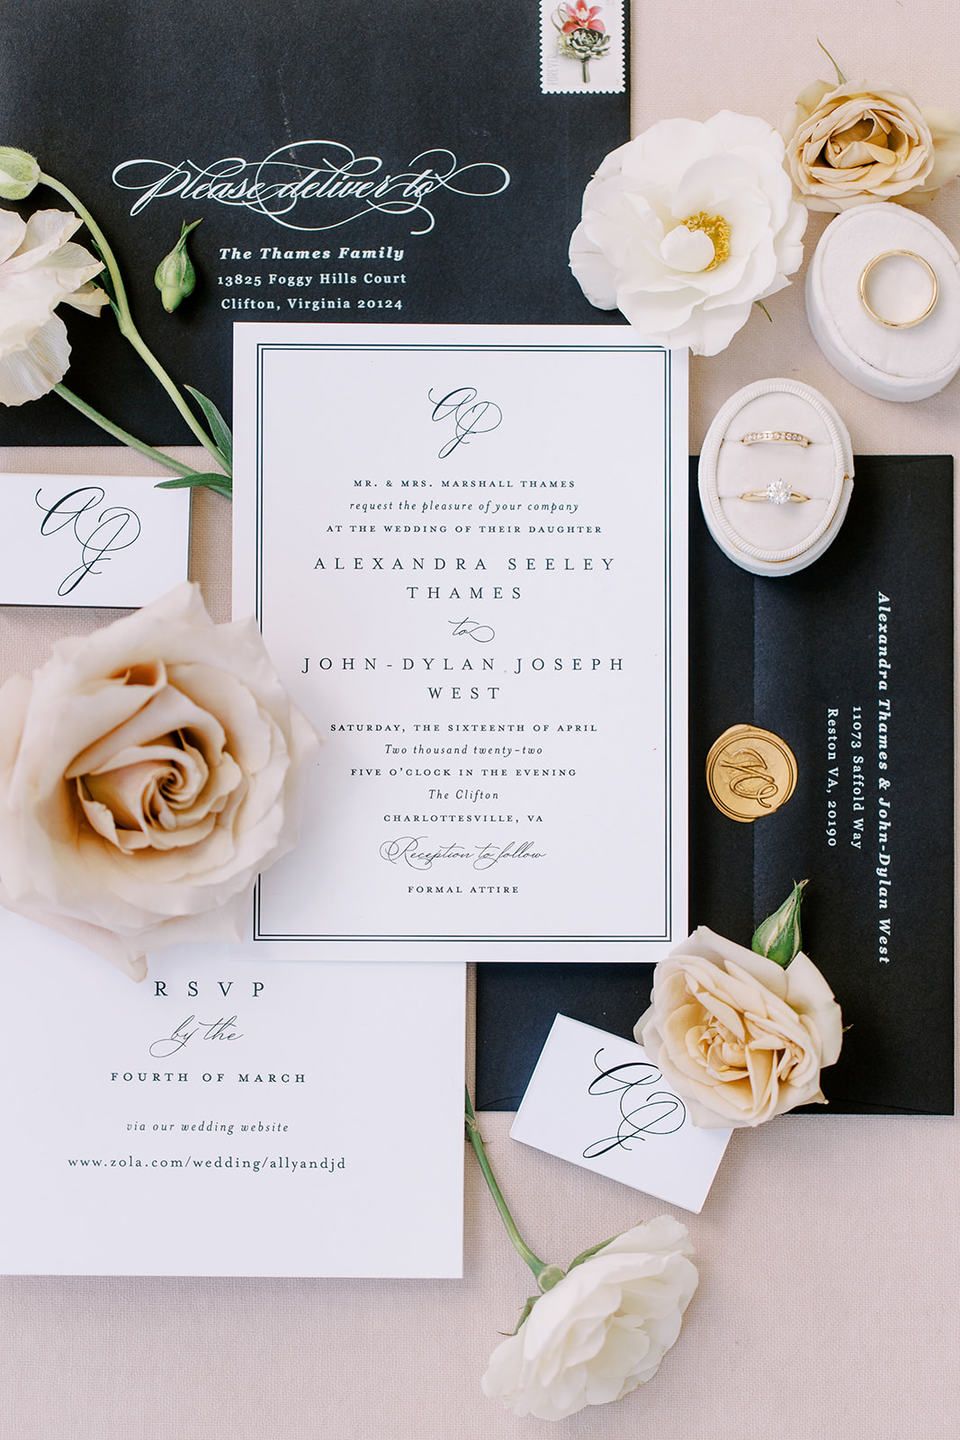 How to Add Personalized Touches to Your Charlottesville Wedding